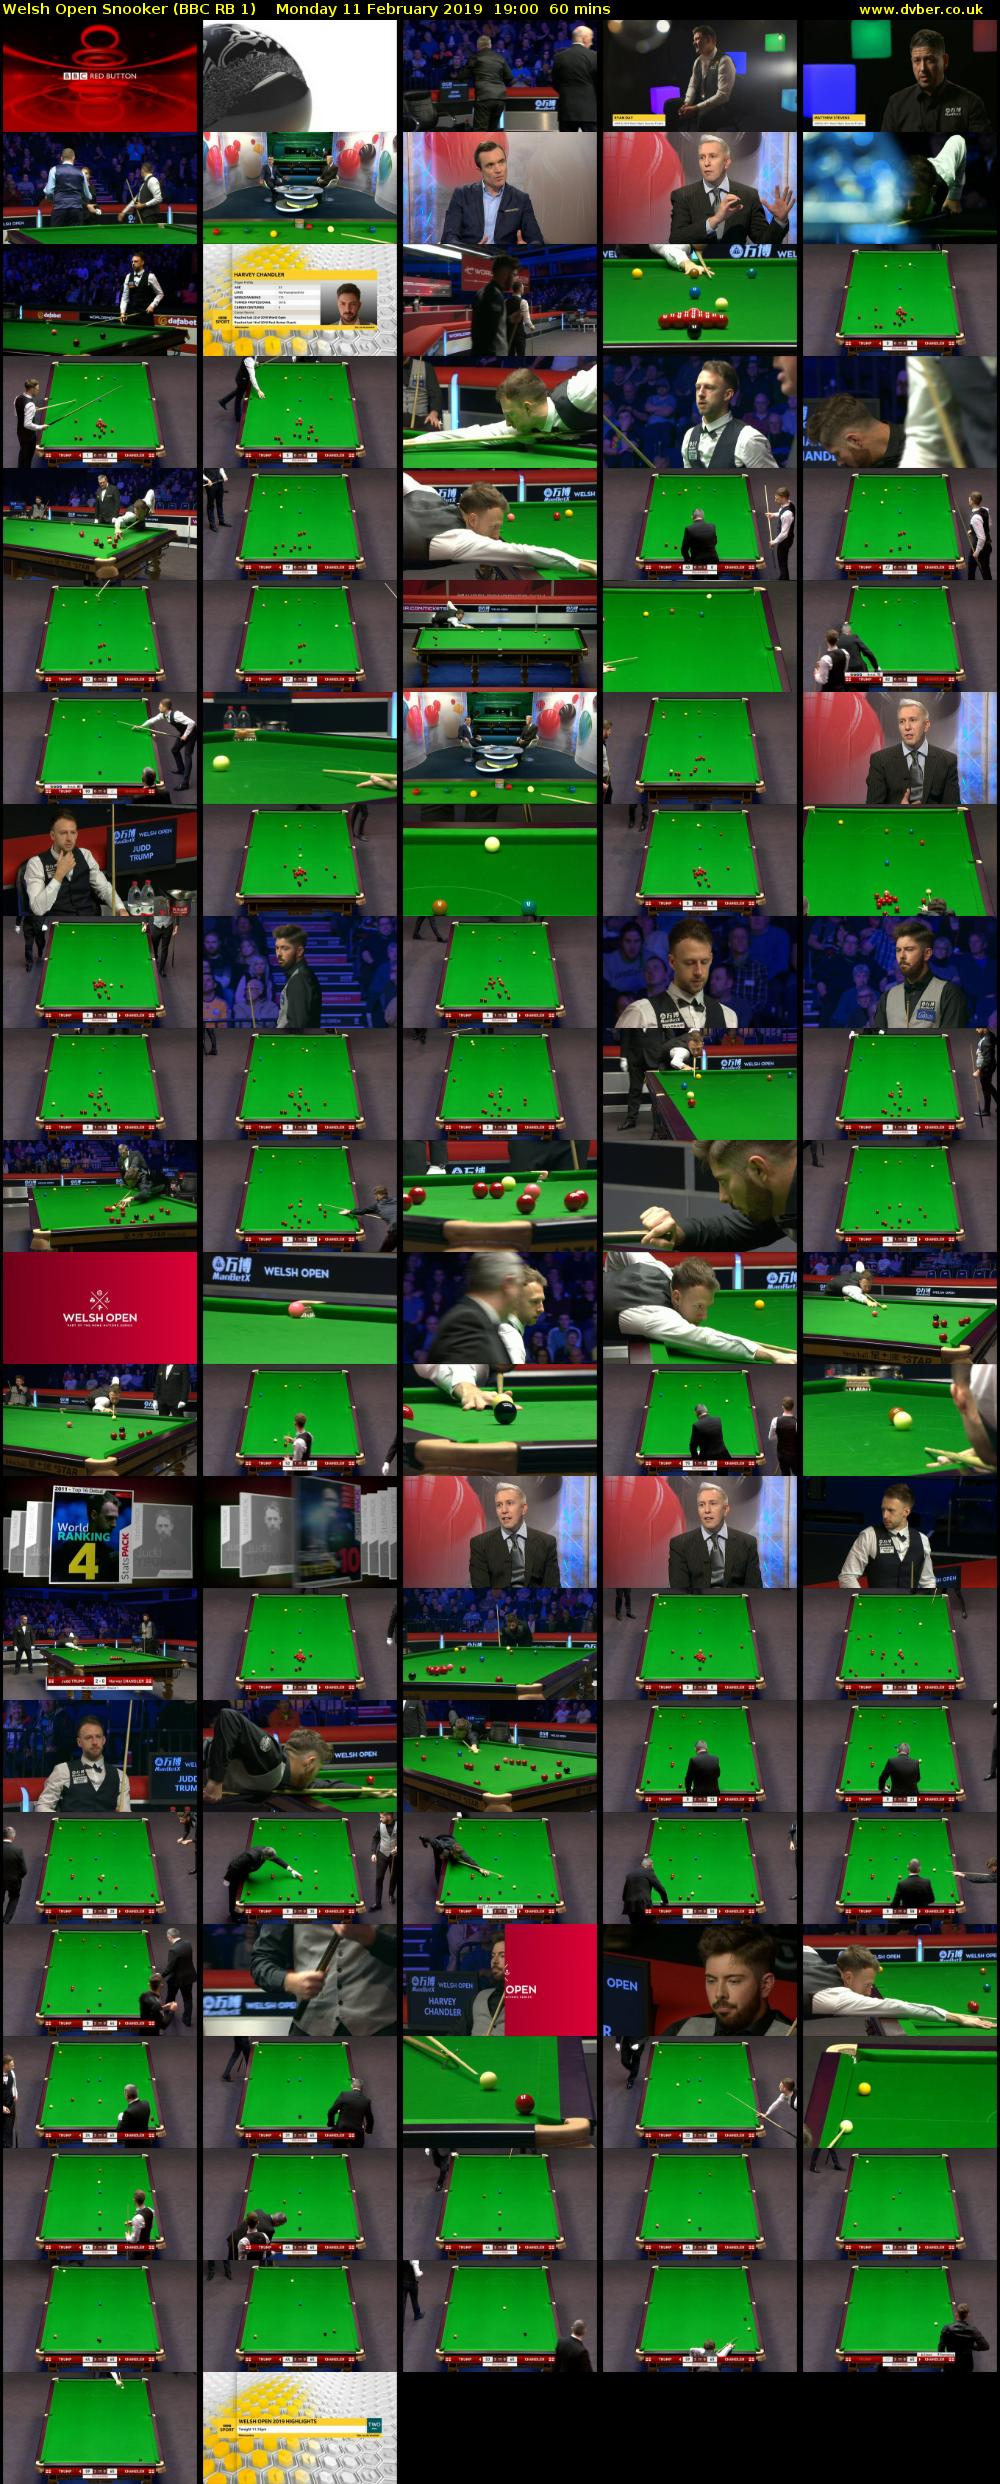 Welsh Open Snooker (BBC RB 1) Monday 11 February 2019 19:00 - 20:00